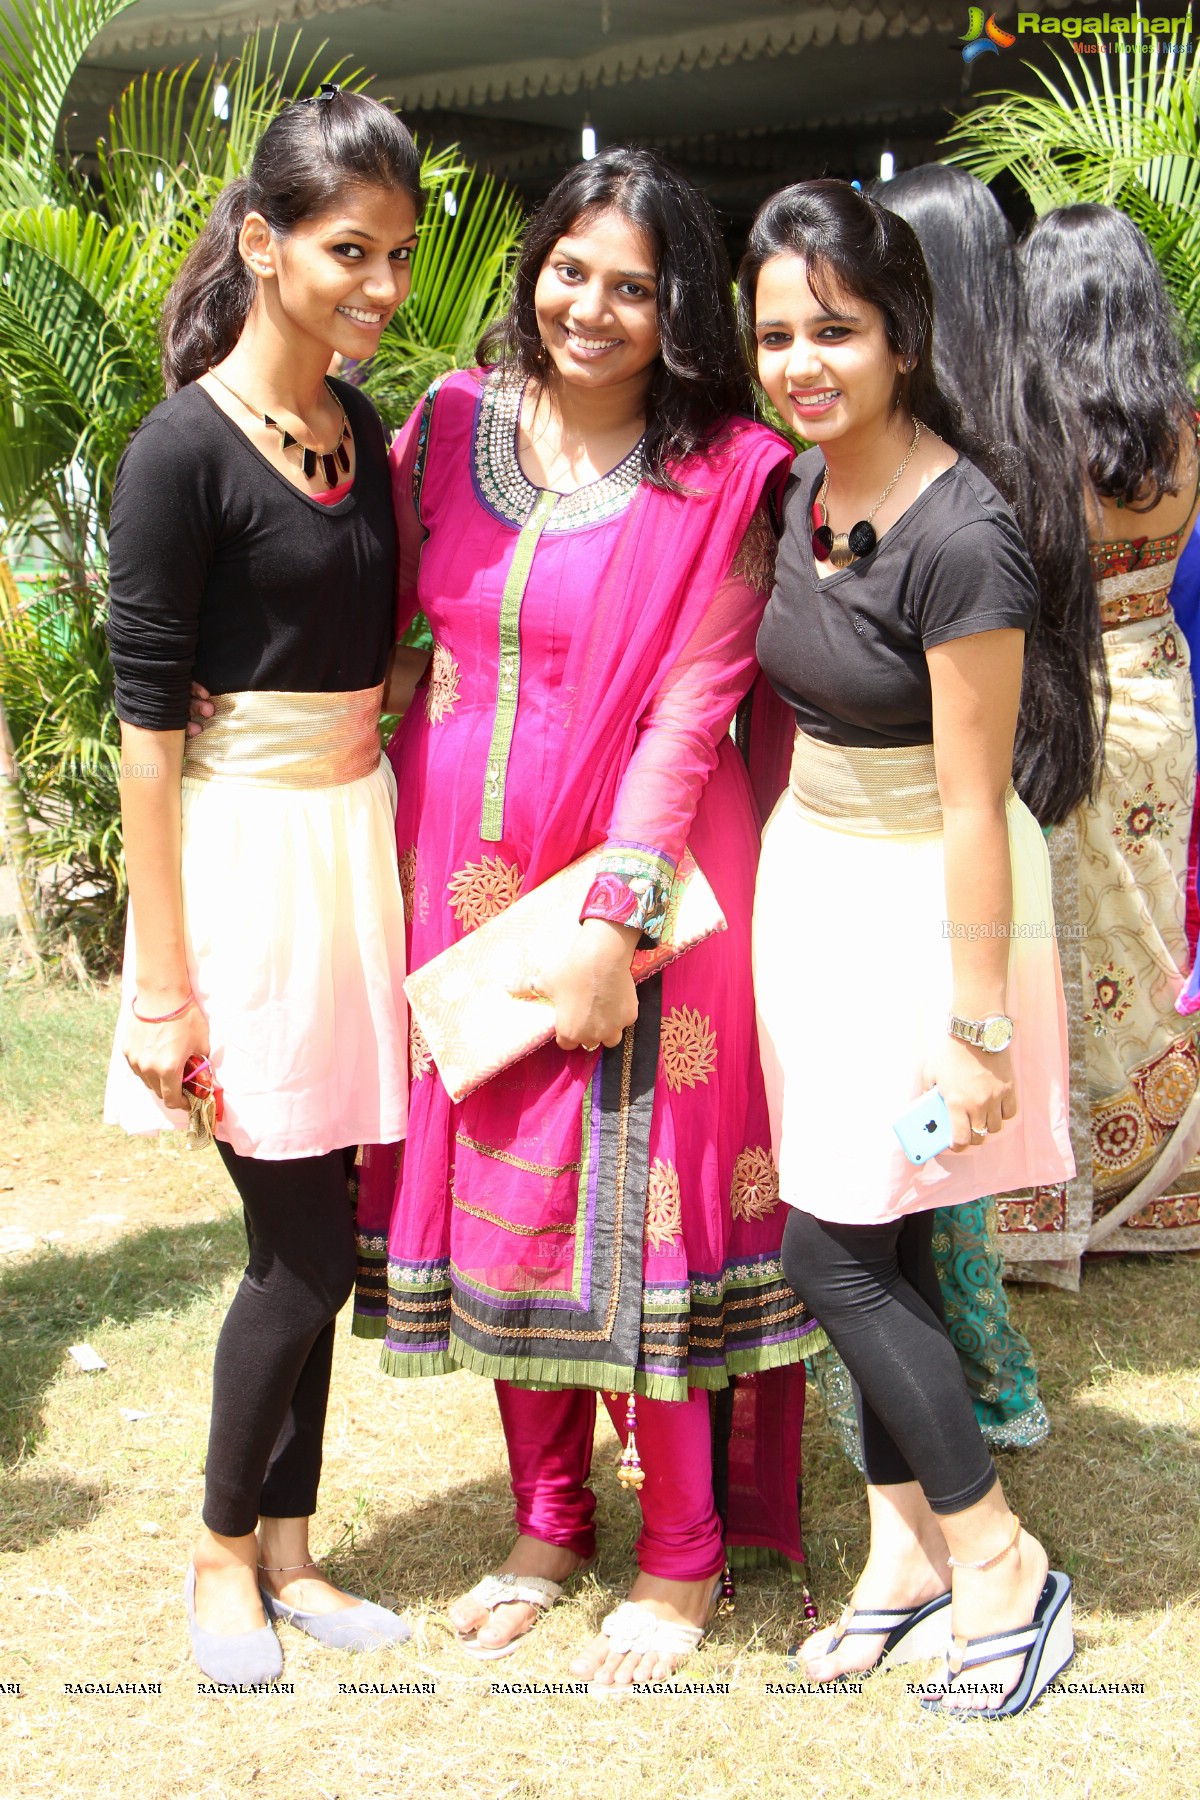 Villa Marie Degree College Freshers Party 2014, Hyderabad